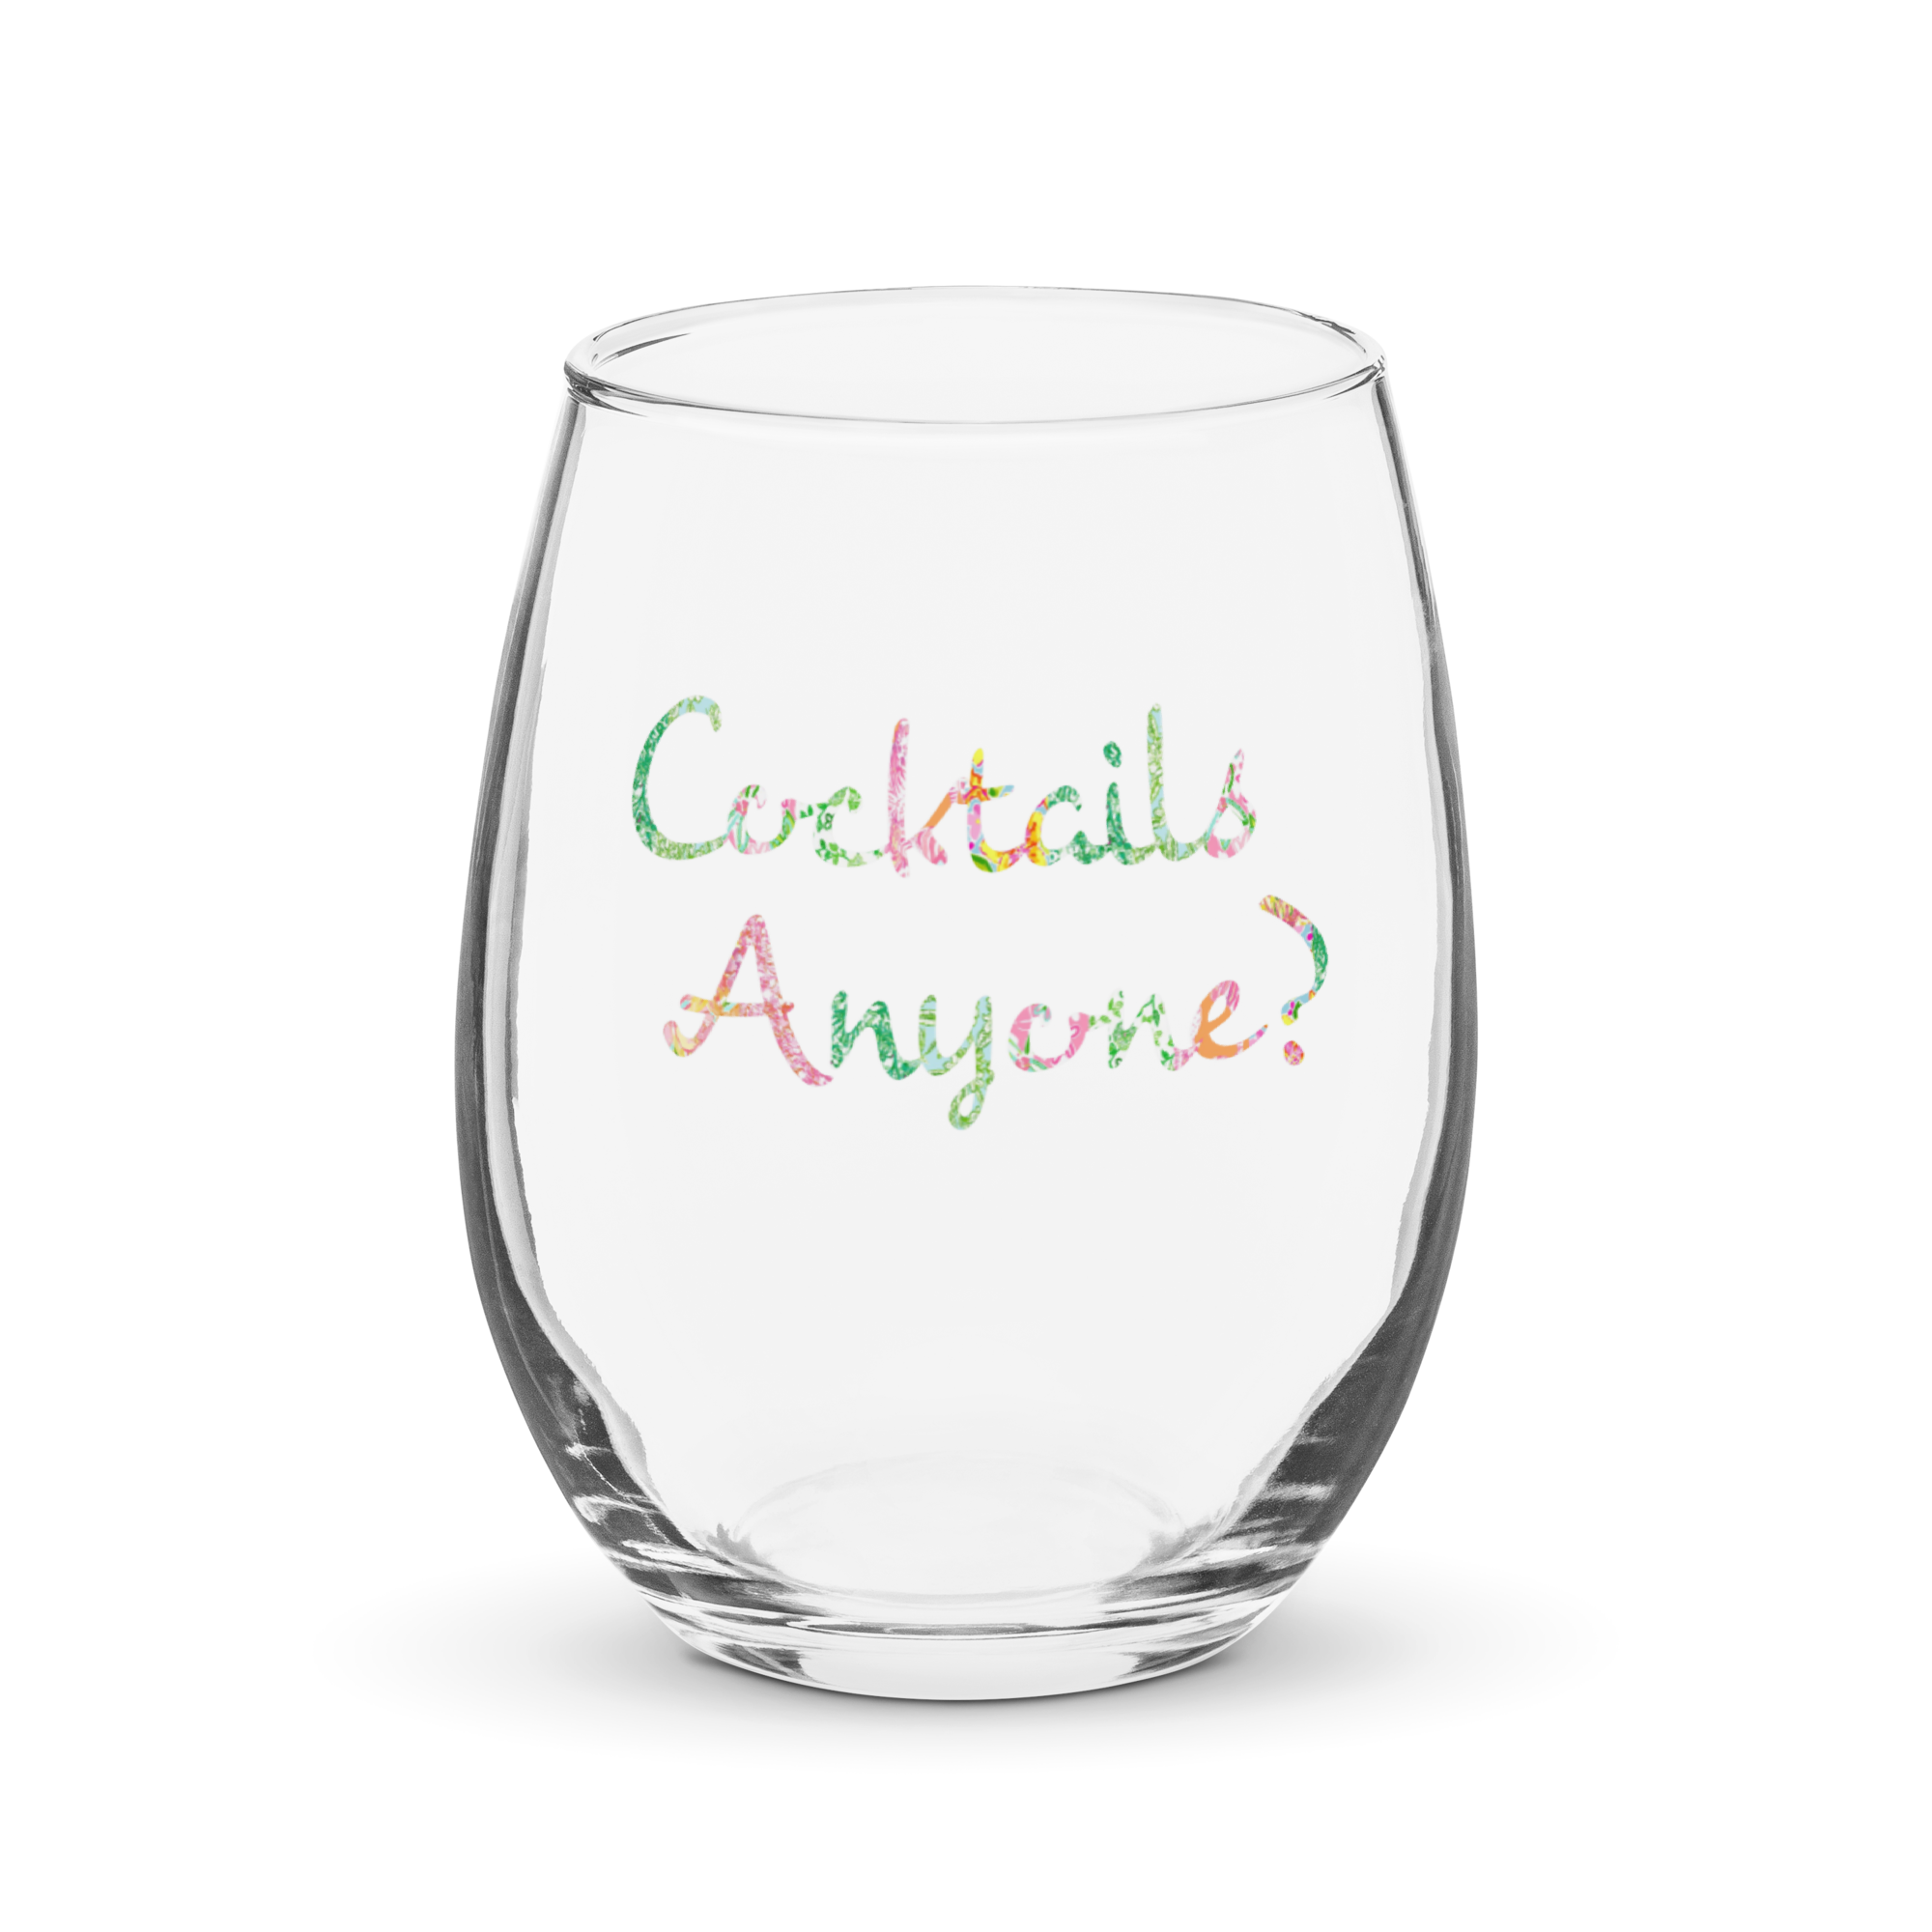 Cocktails Anyone? Stemless wine glass